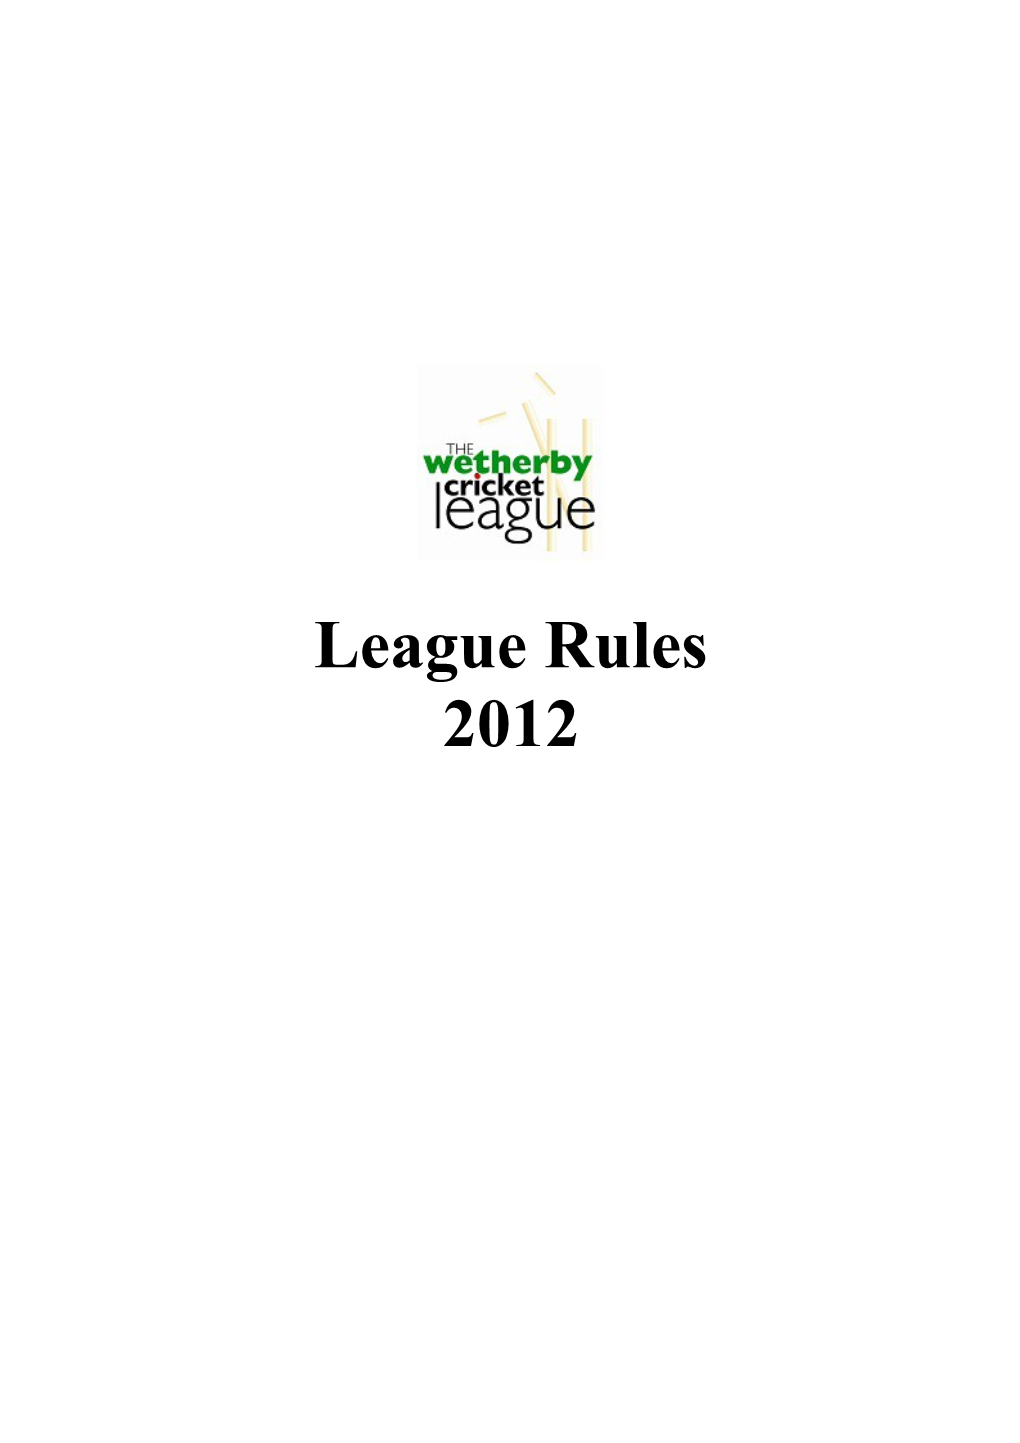 Rules of the League - 2010